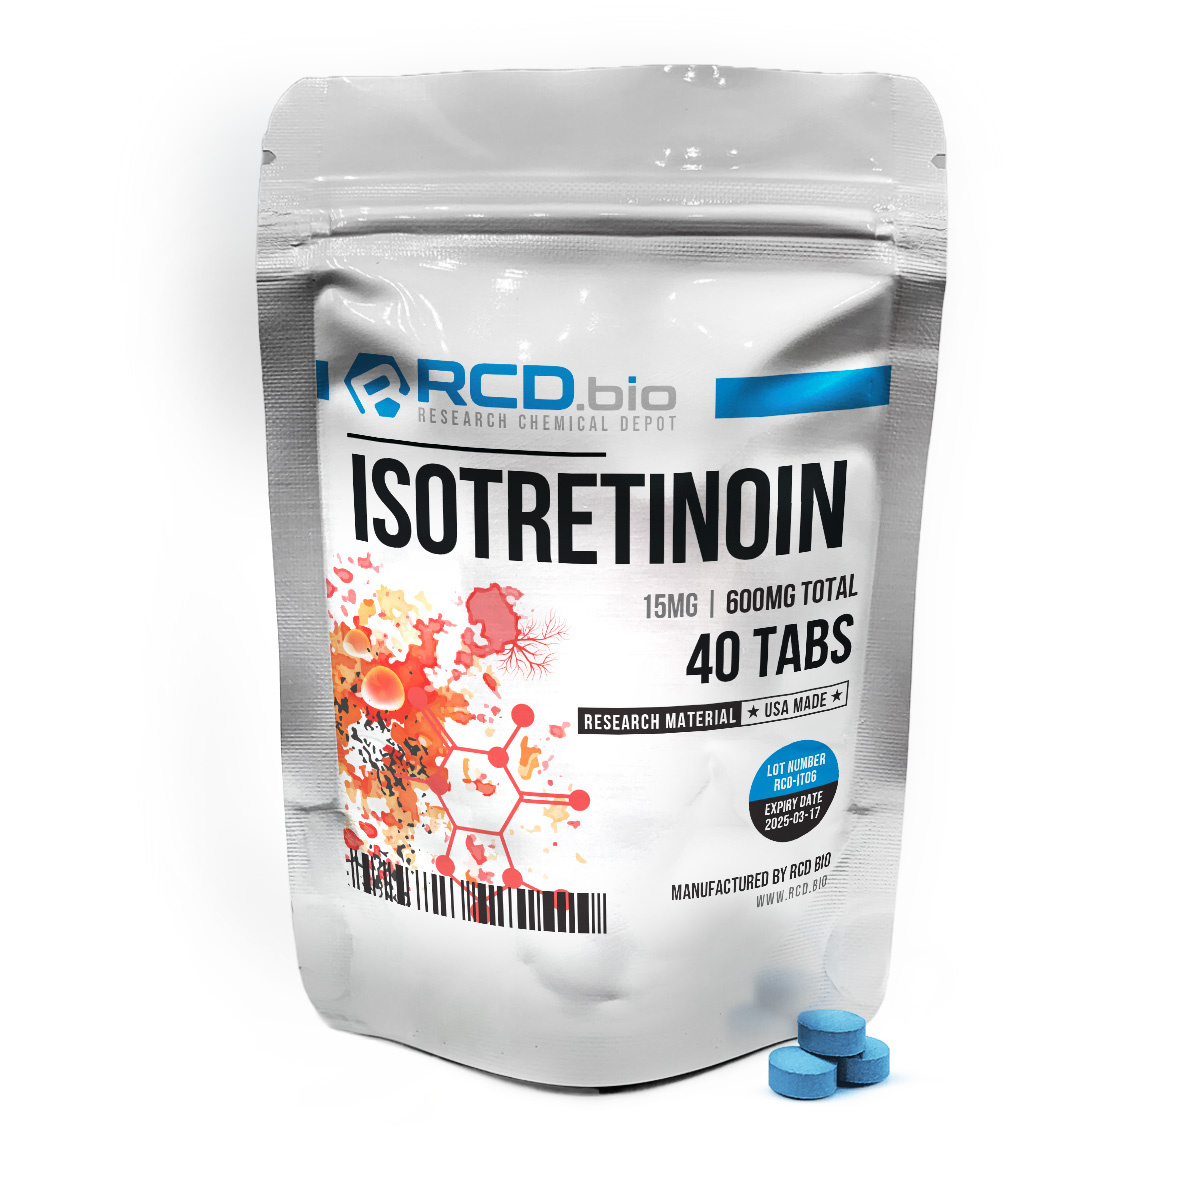 Isotretinoin Tablets For Sale | Fast Shipping | RCD.bio